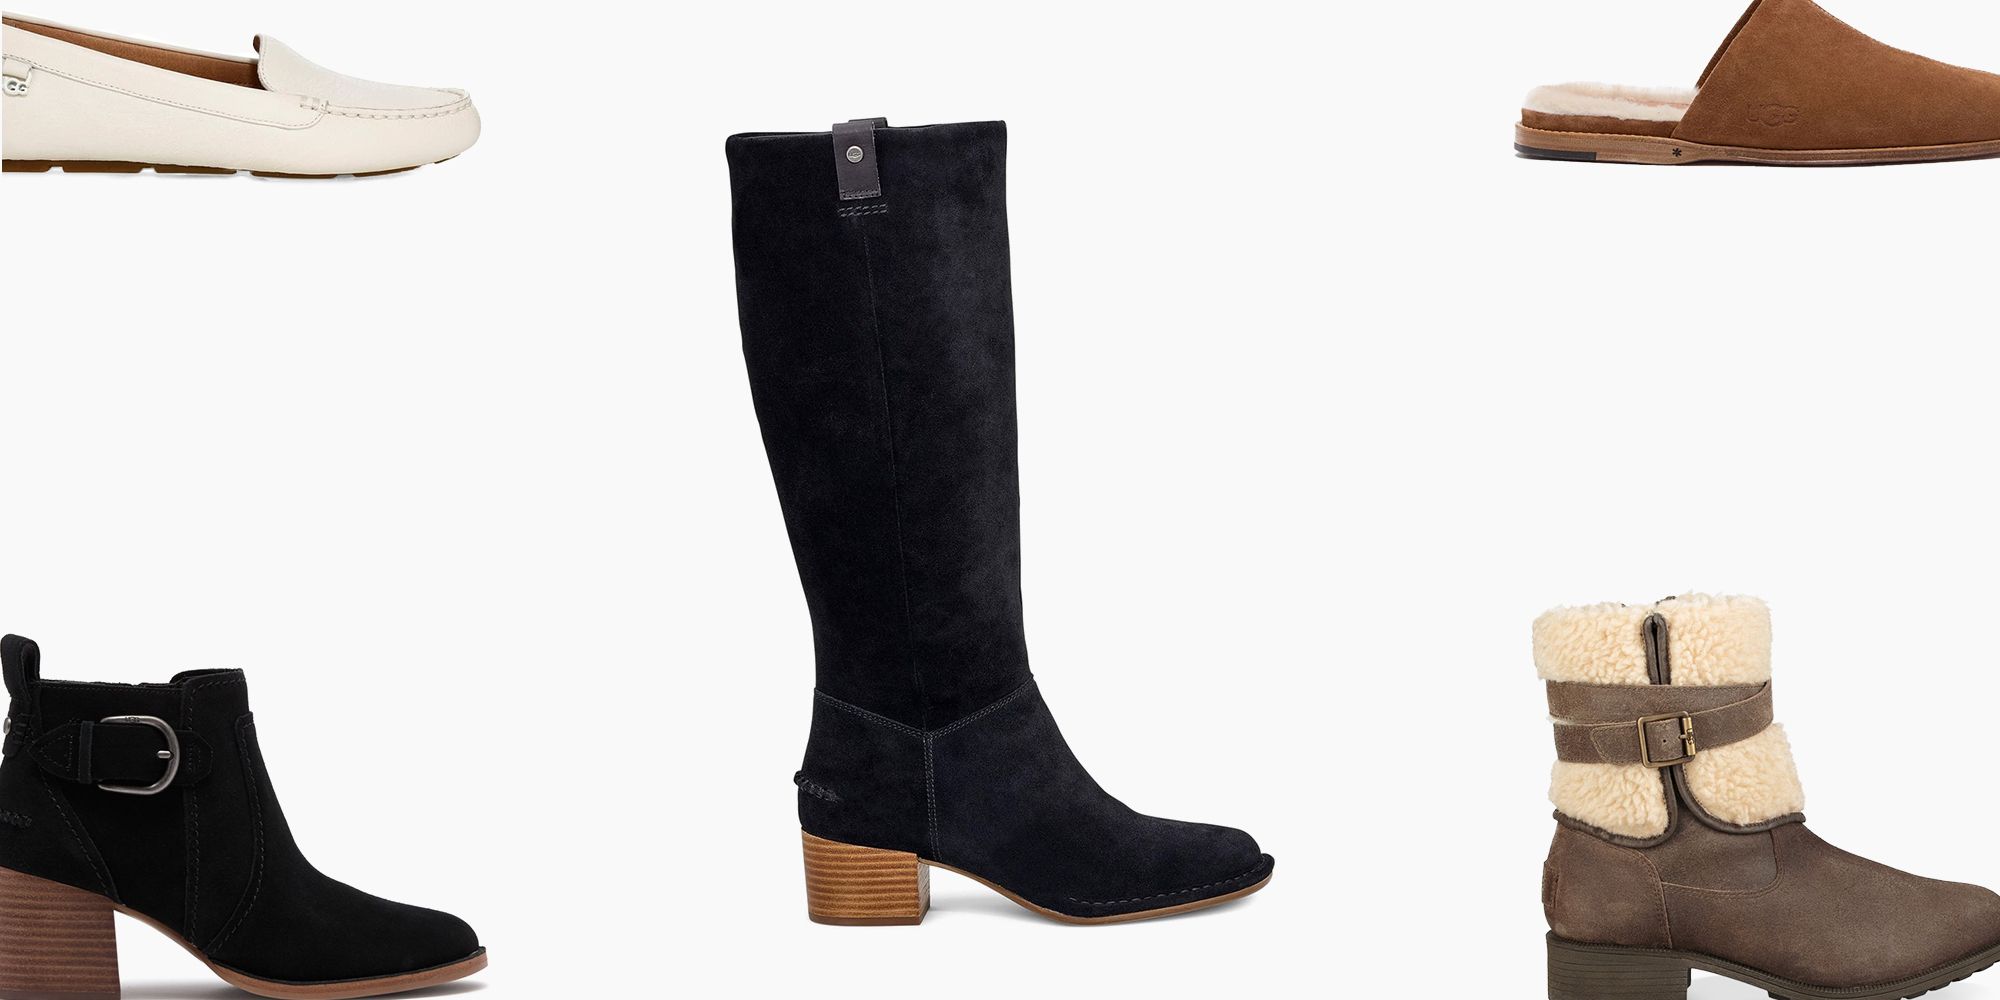 The Nordstrom Rack fall booties sale includes up to 80% off UGGs